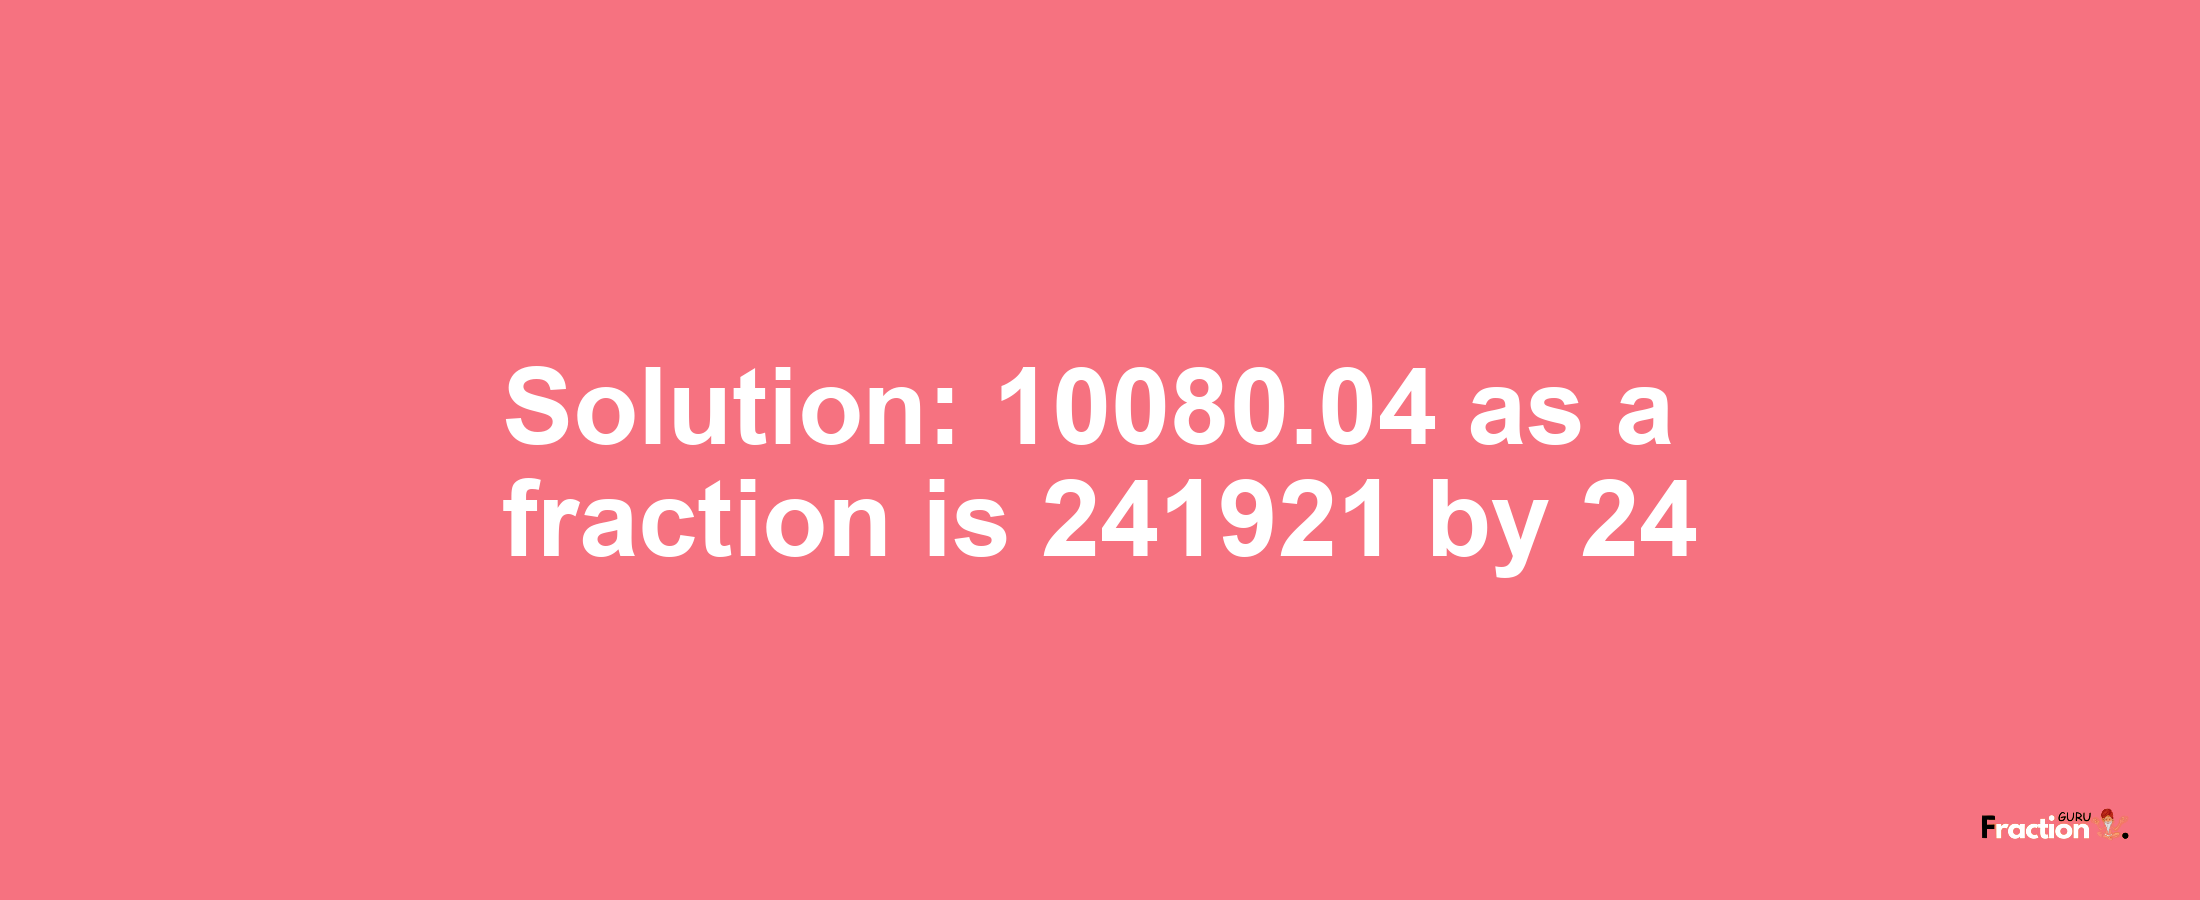 Solution:10080.04 as a fraction is 241921/24